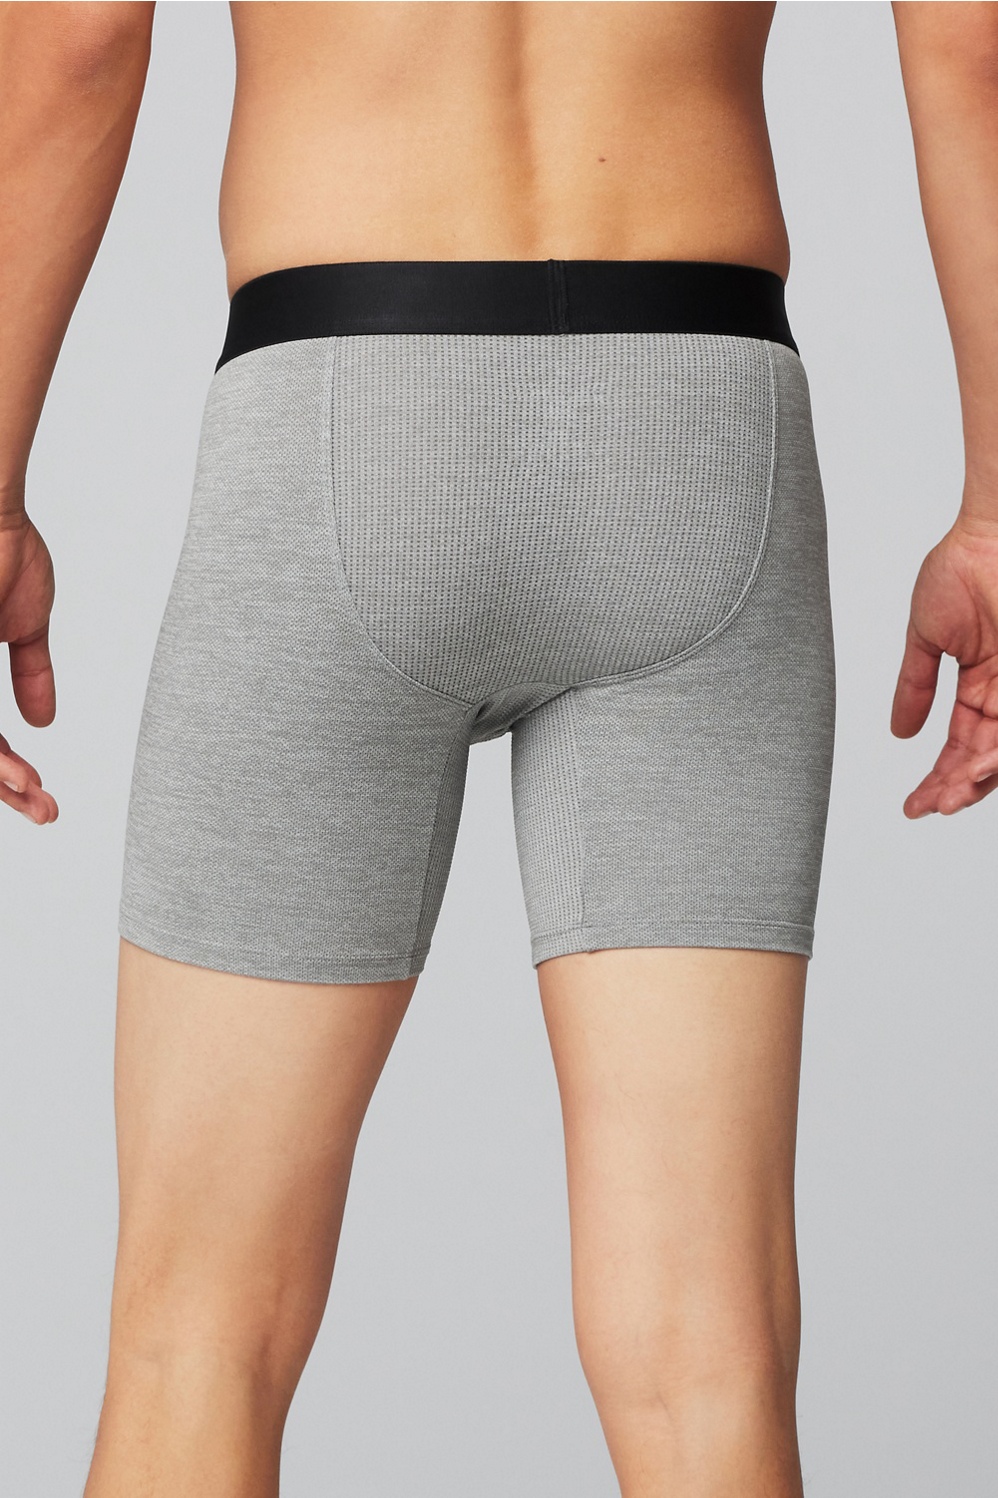 EVB Sport on X: Our EVB Boxer Briefs are designed to keep you